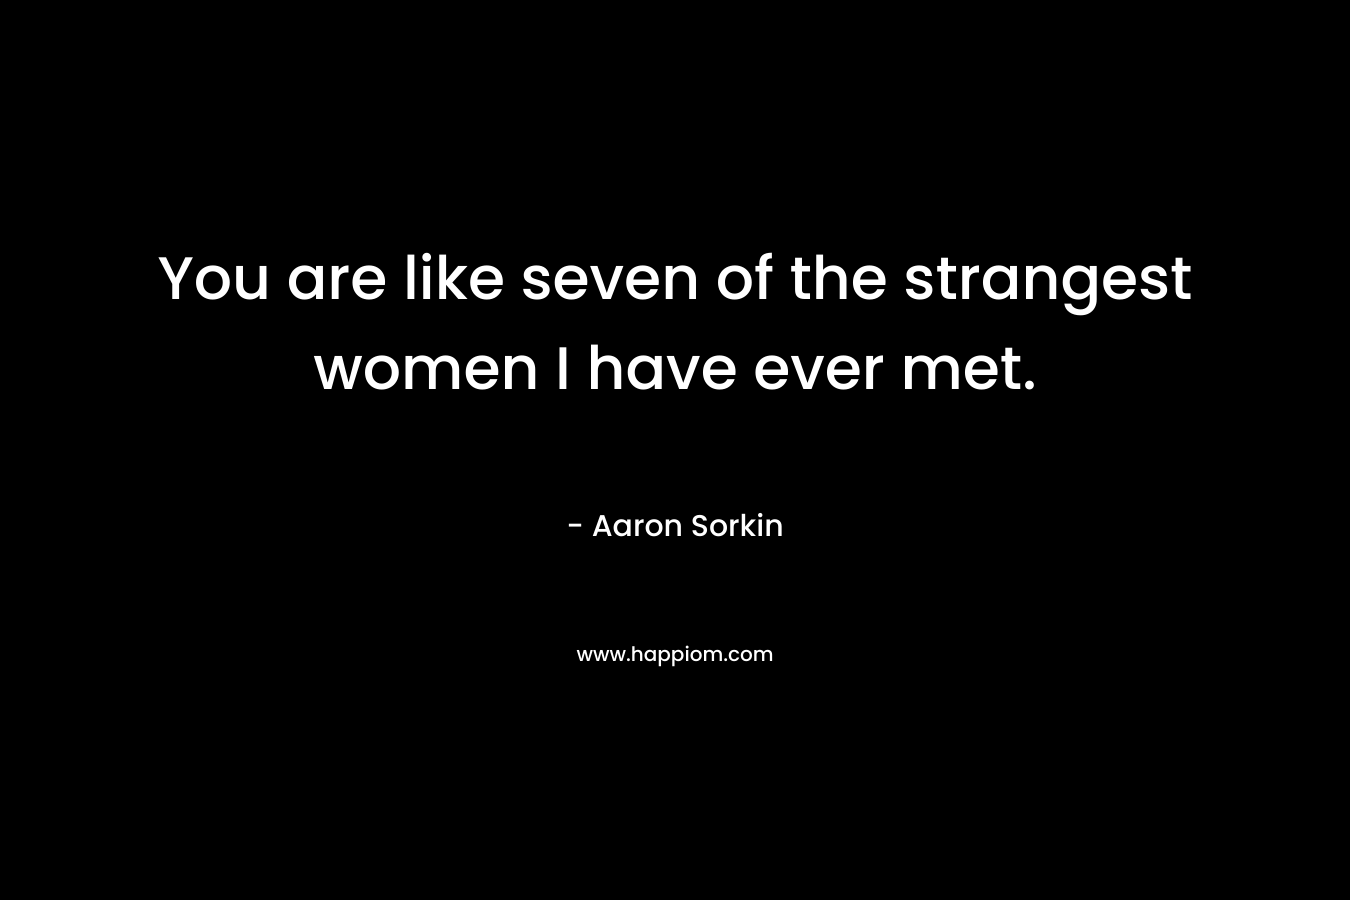 You are like seven of the strangest women I have ever met. – Aaron Sorkin